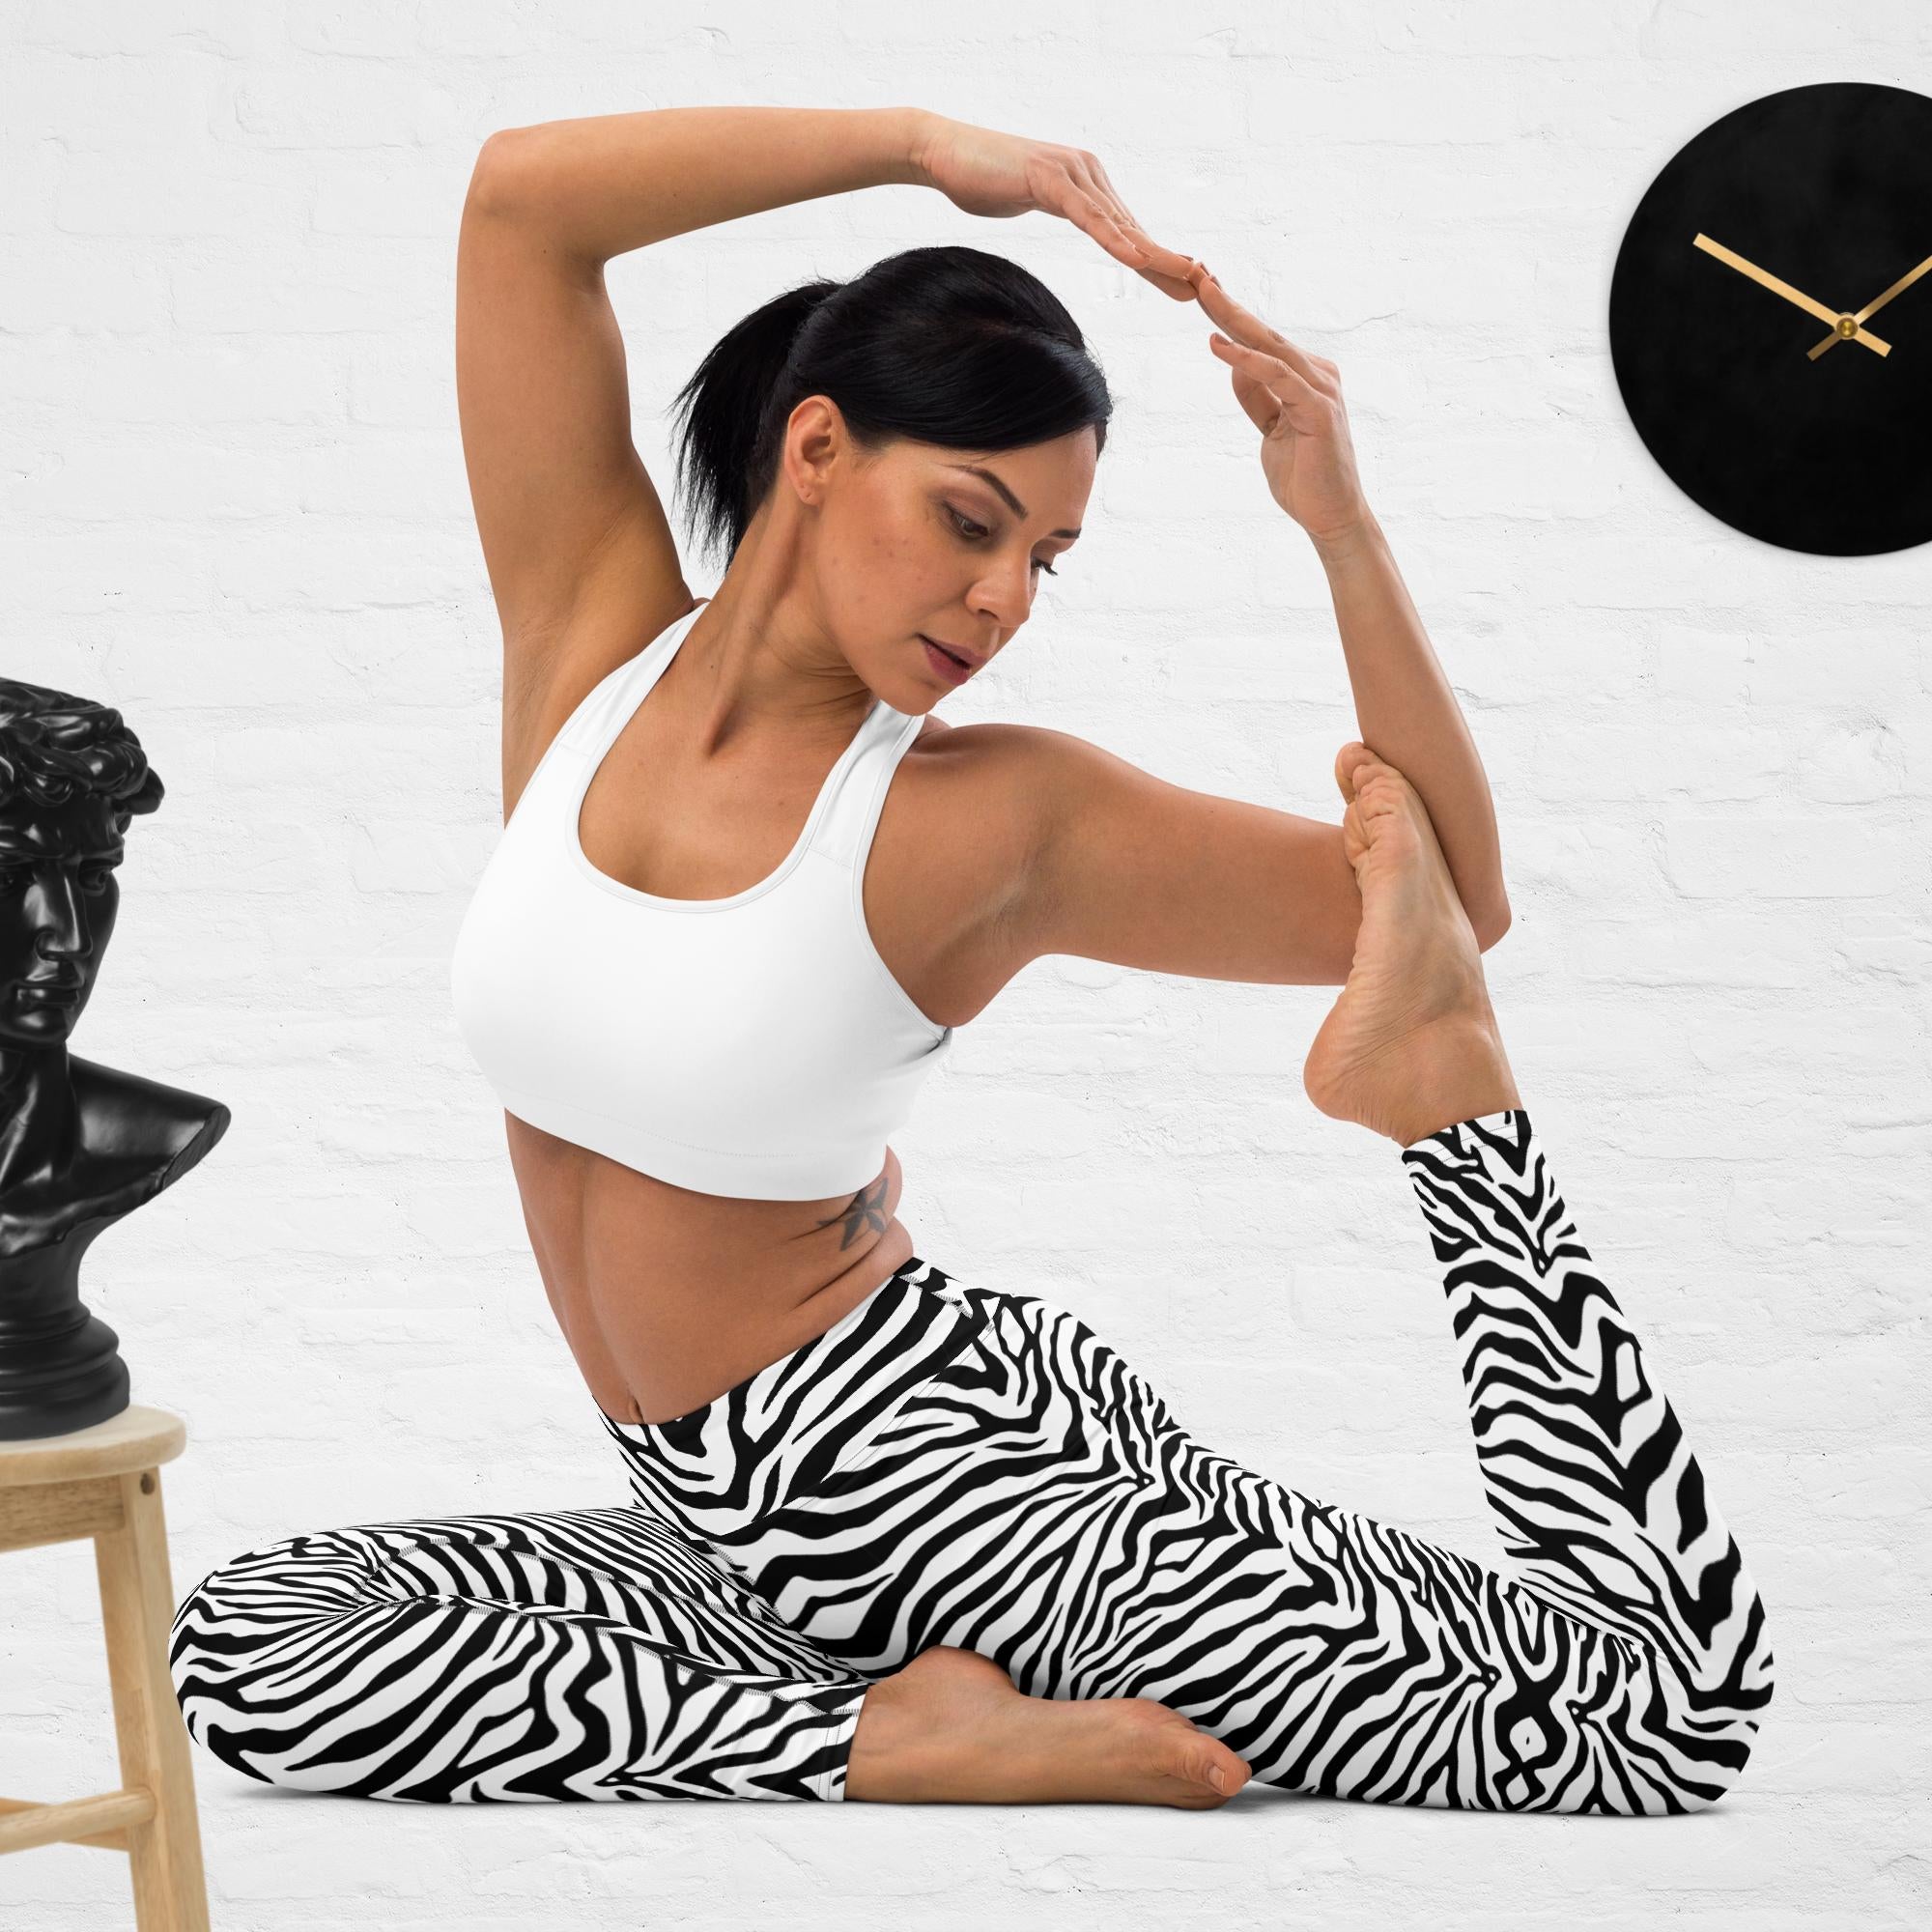 Zebra Leggings - Revive Wear     Show everyone your wild side with these super soft zebra leggings. Great for everyday wear and workouts. Browse Workout Leggings and Yoga Pants at Revive Wear.